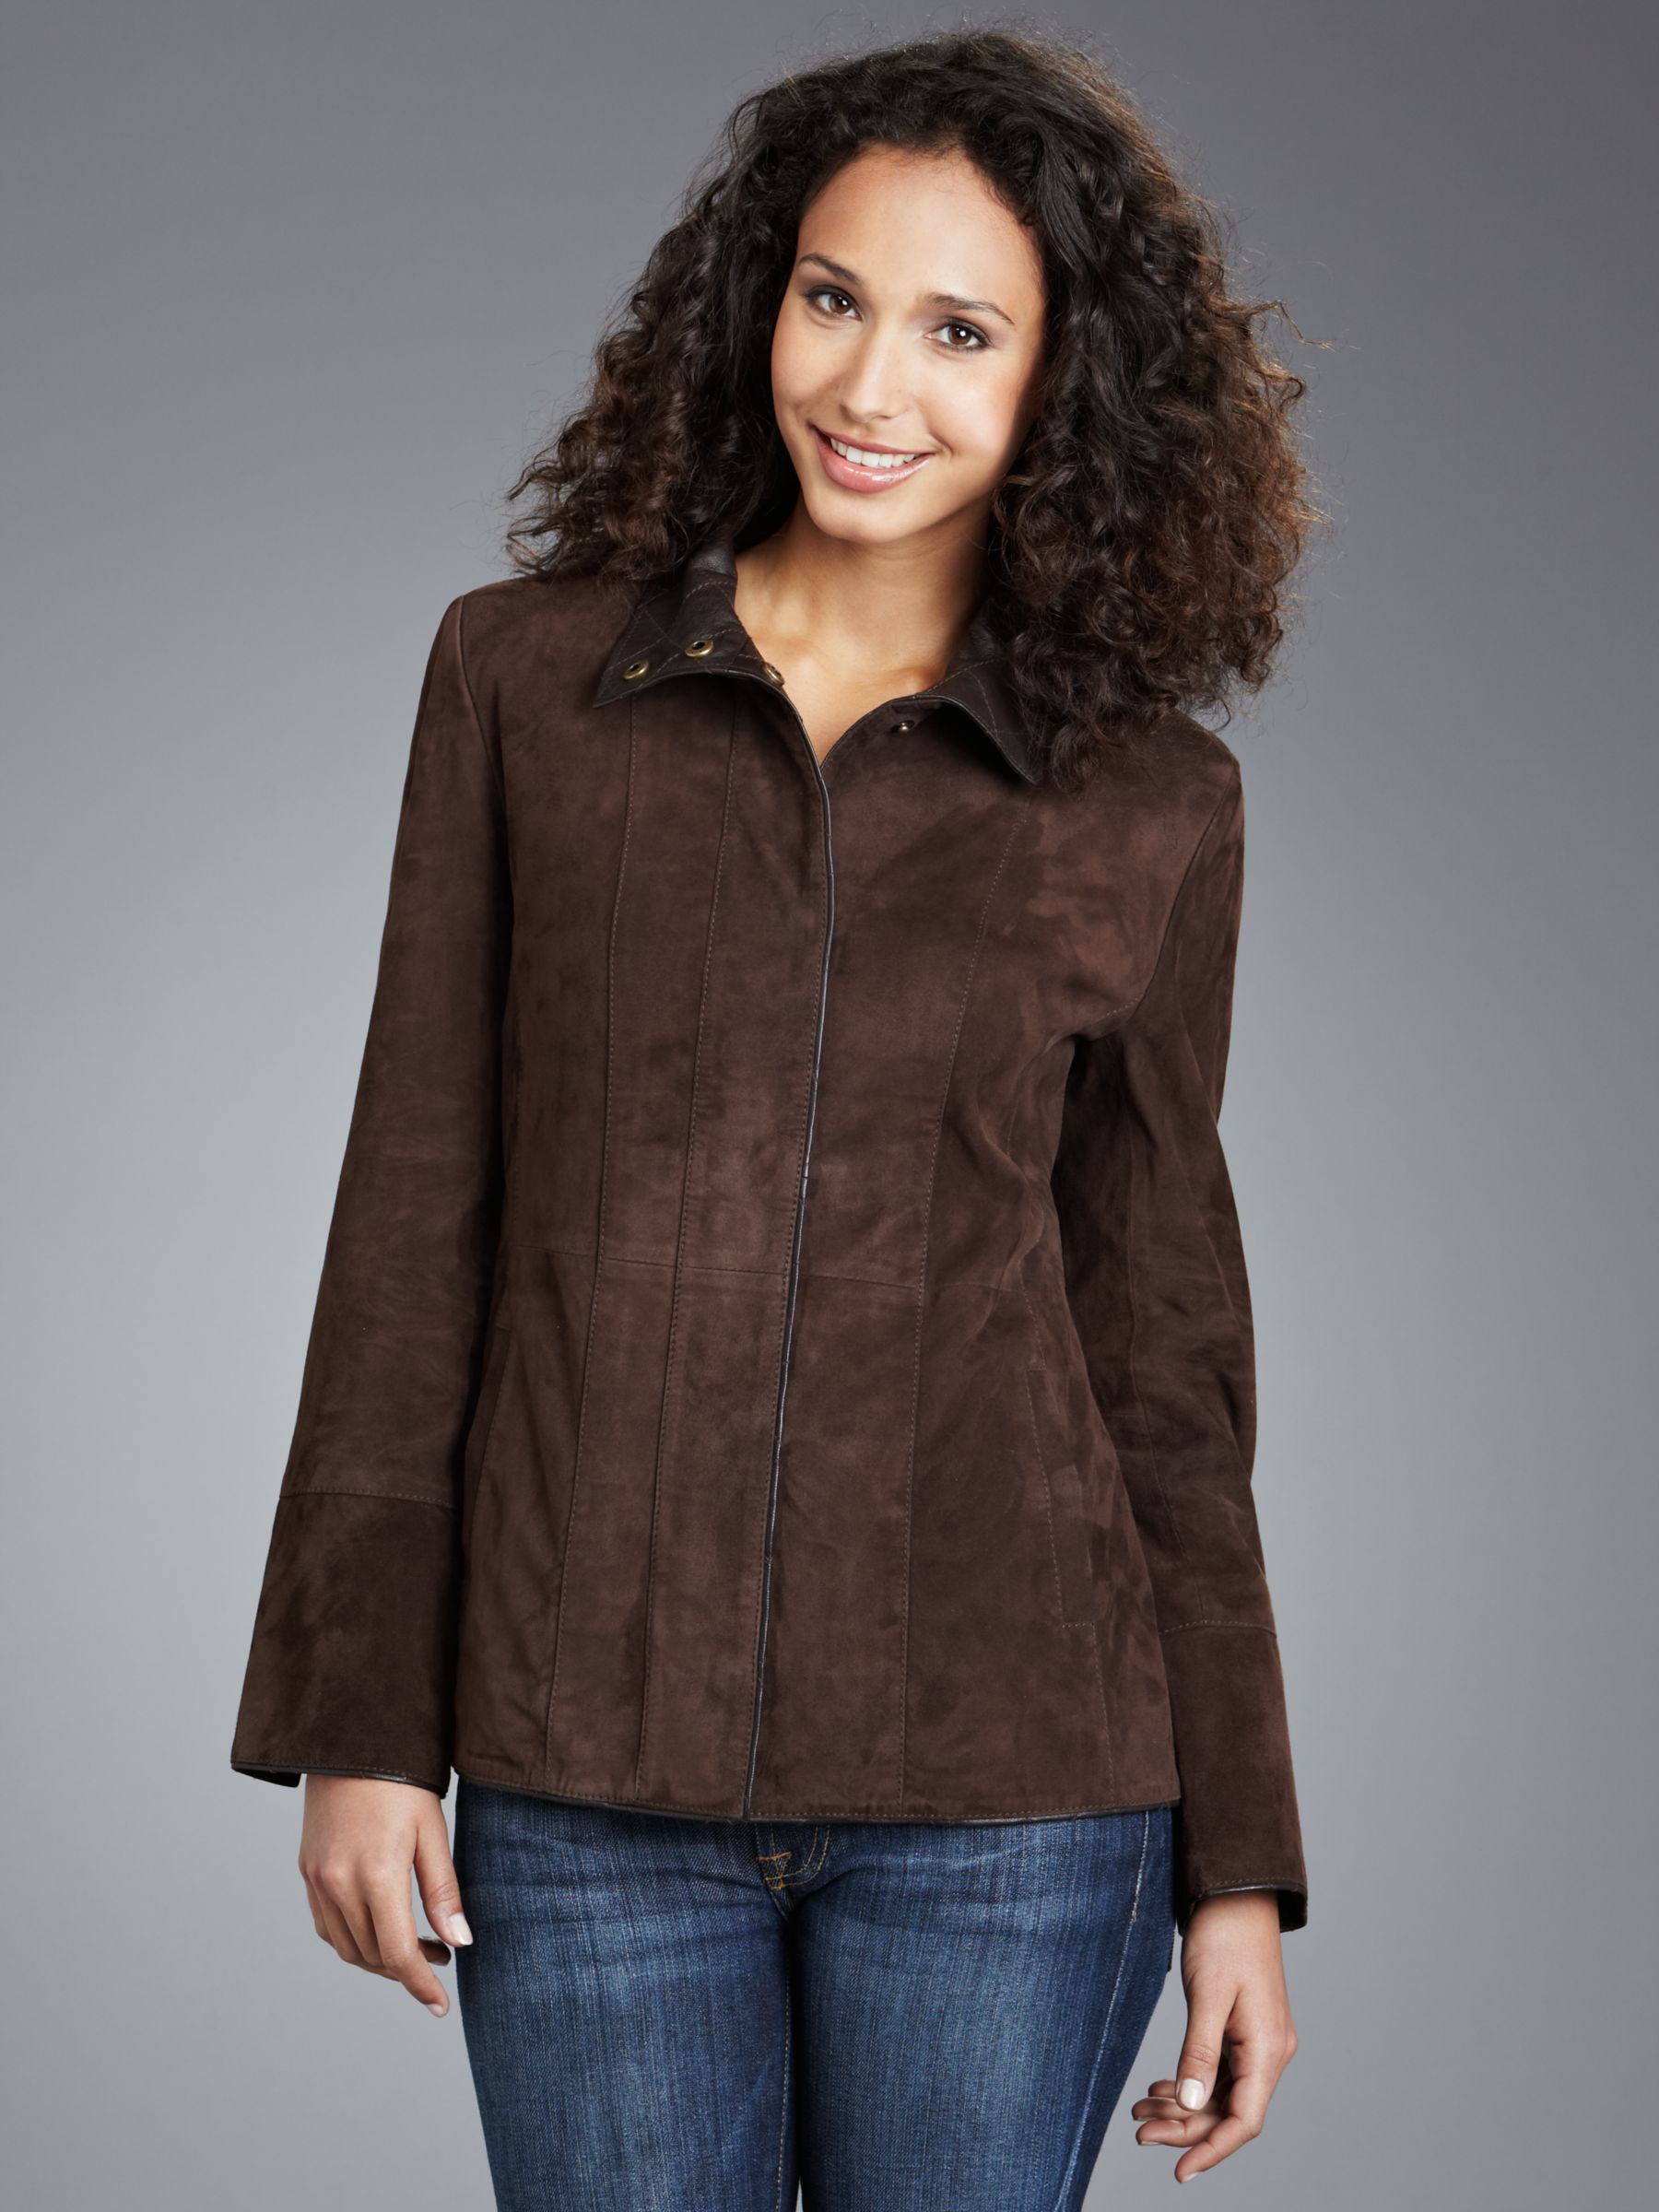 John Lewis Women Holly Suede Funnel Neck Jacket, Chocolate at JohnLewis